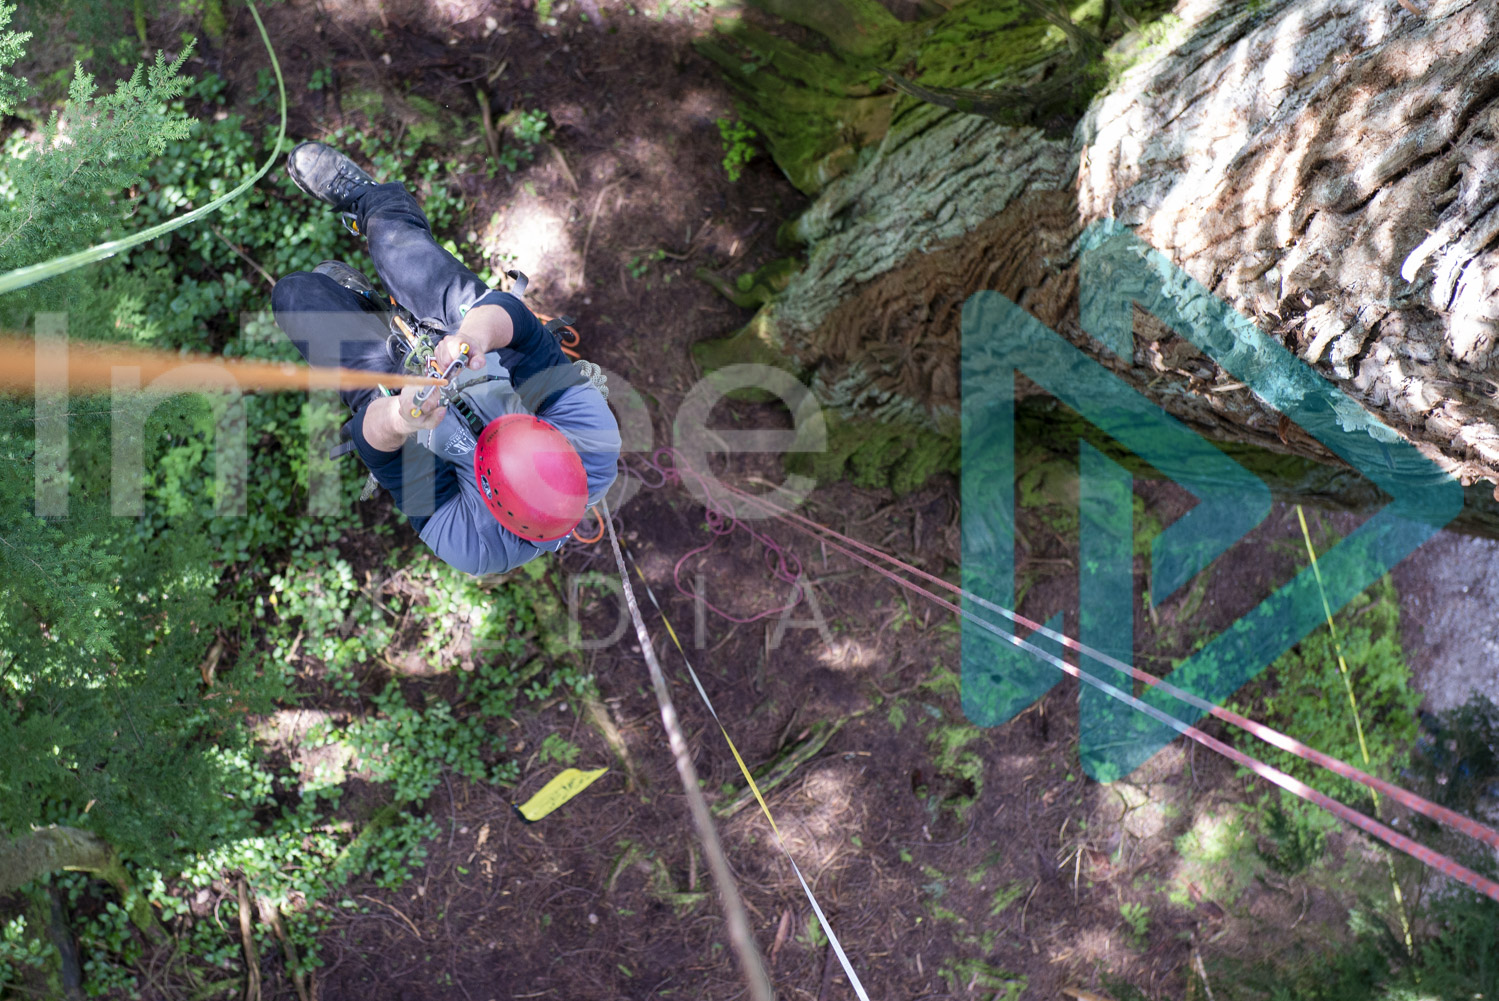 Looking down rope to Climbing Arborist ascending rope into canopy of old growth cedar - Arborist Stock Photo 001-21-6898